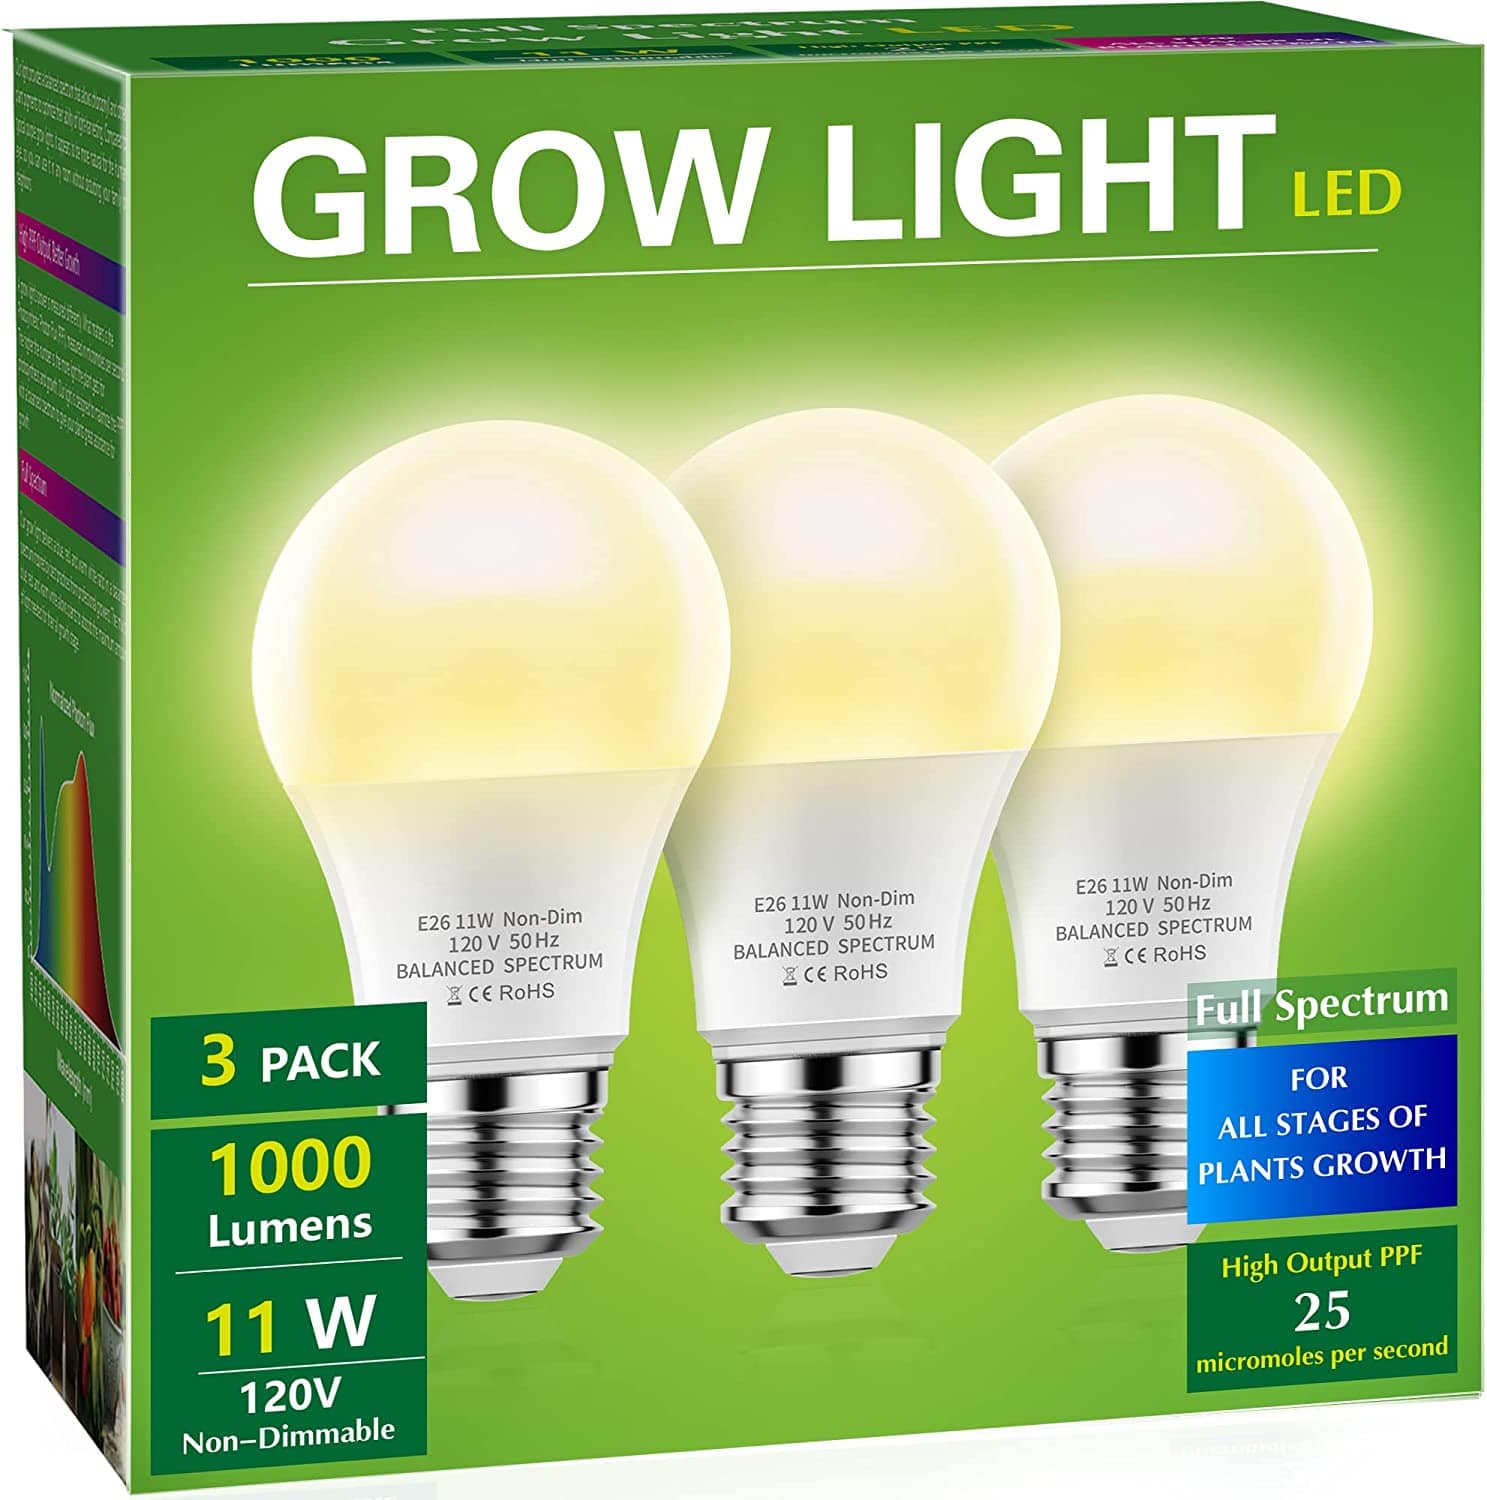 Briignite LED Grow Light Bulb - 11W, A19, 100W Equivalent, E26 Base, 3Pack - Perfect for Indoor Plants - Smart Tech Shopping